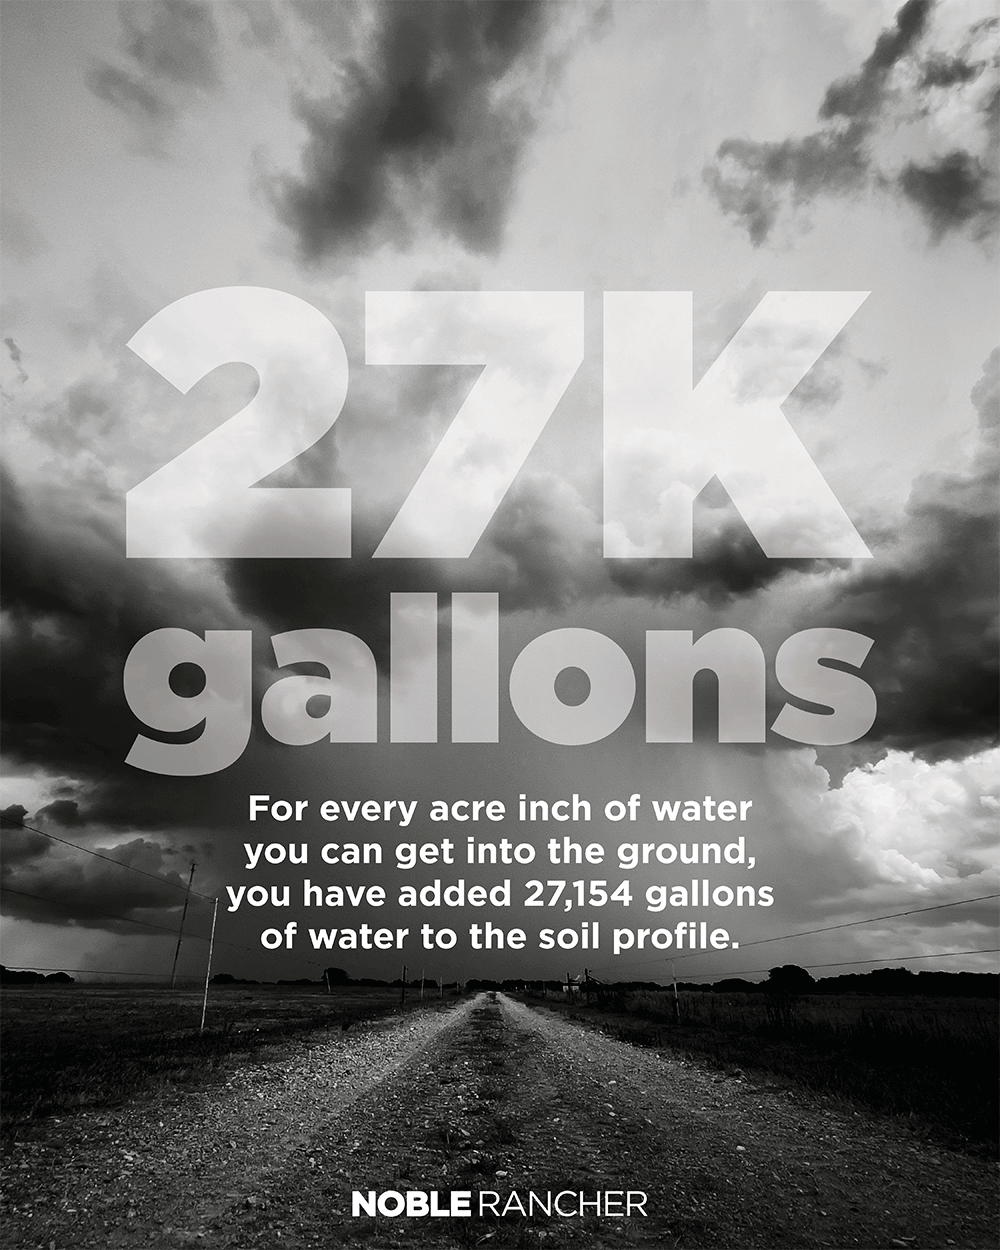 Infographic: For every acre inch of water you can get into the ground, you have added 27,154 gallons of water to the soil profile.